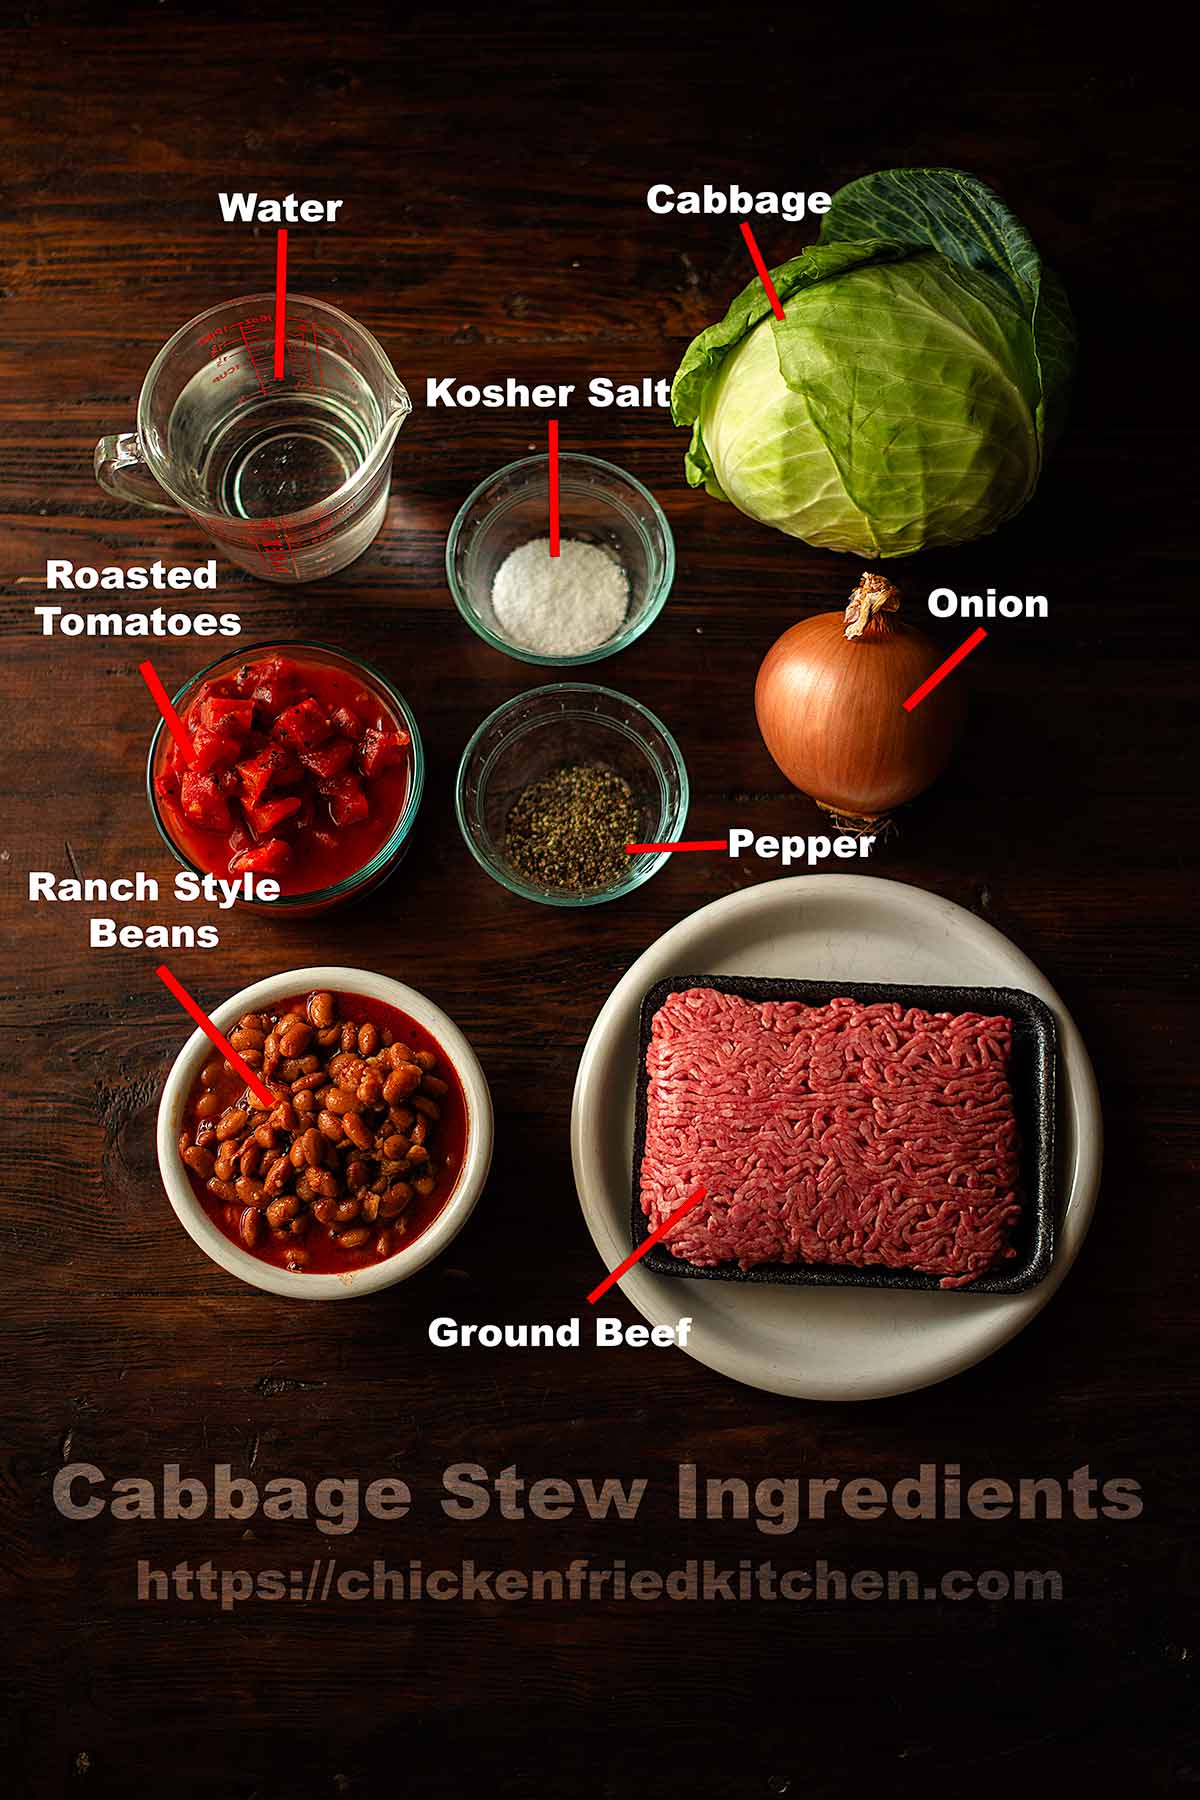 Cabbage stew ingredients laid out and labeled on a rustic wooden table.